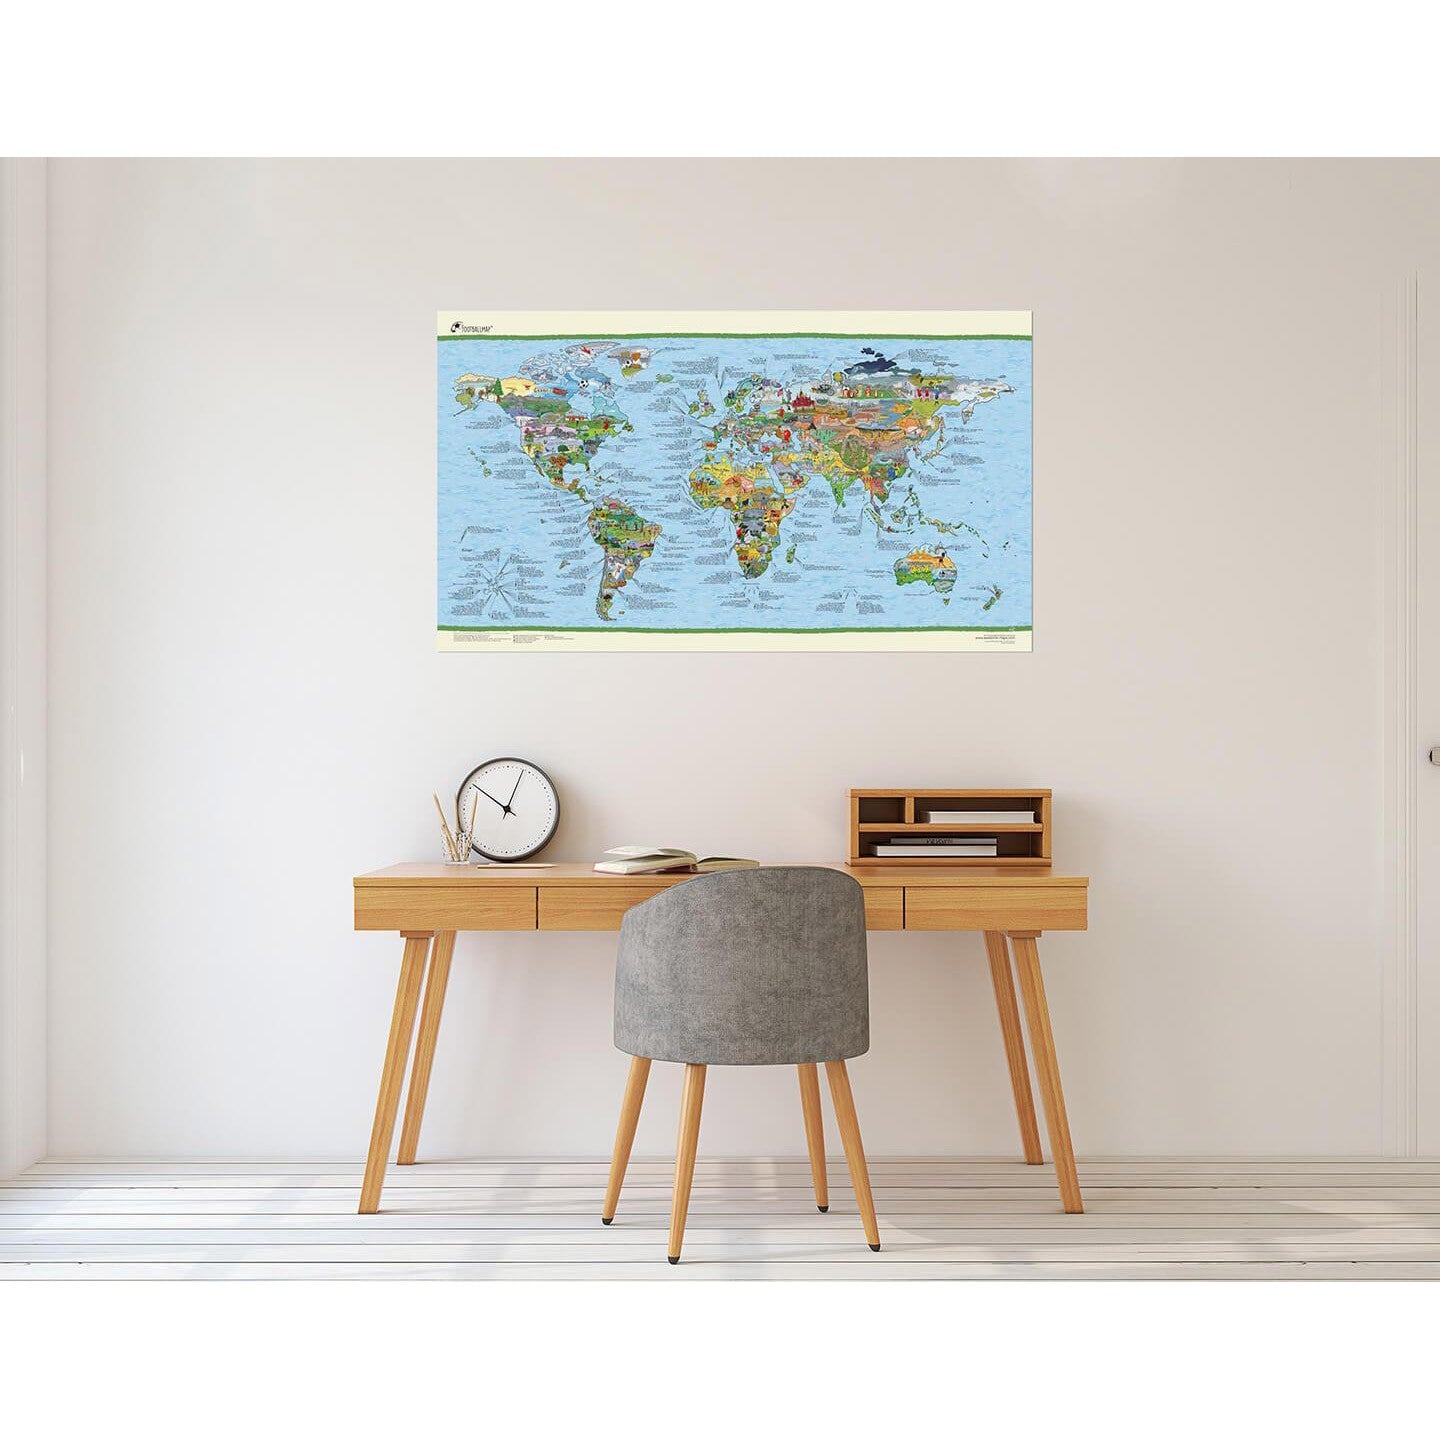 Awesome Maps - World Map Poster Football Map Re-writable